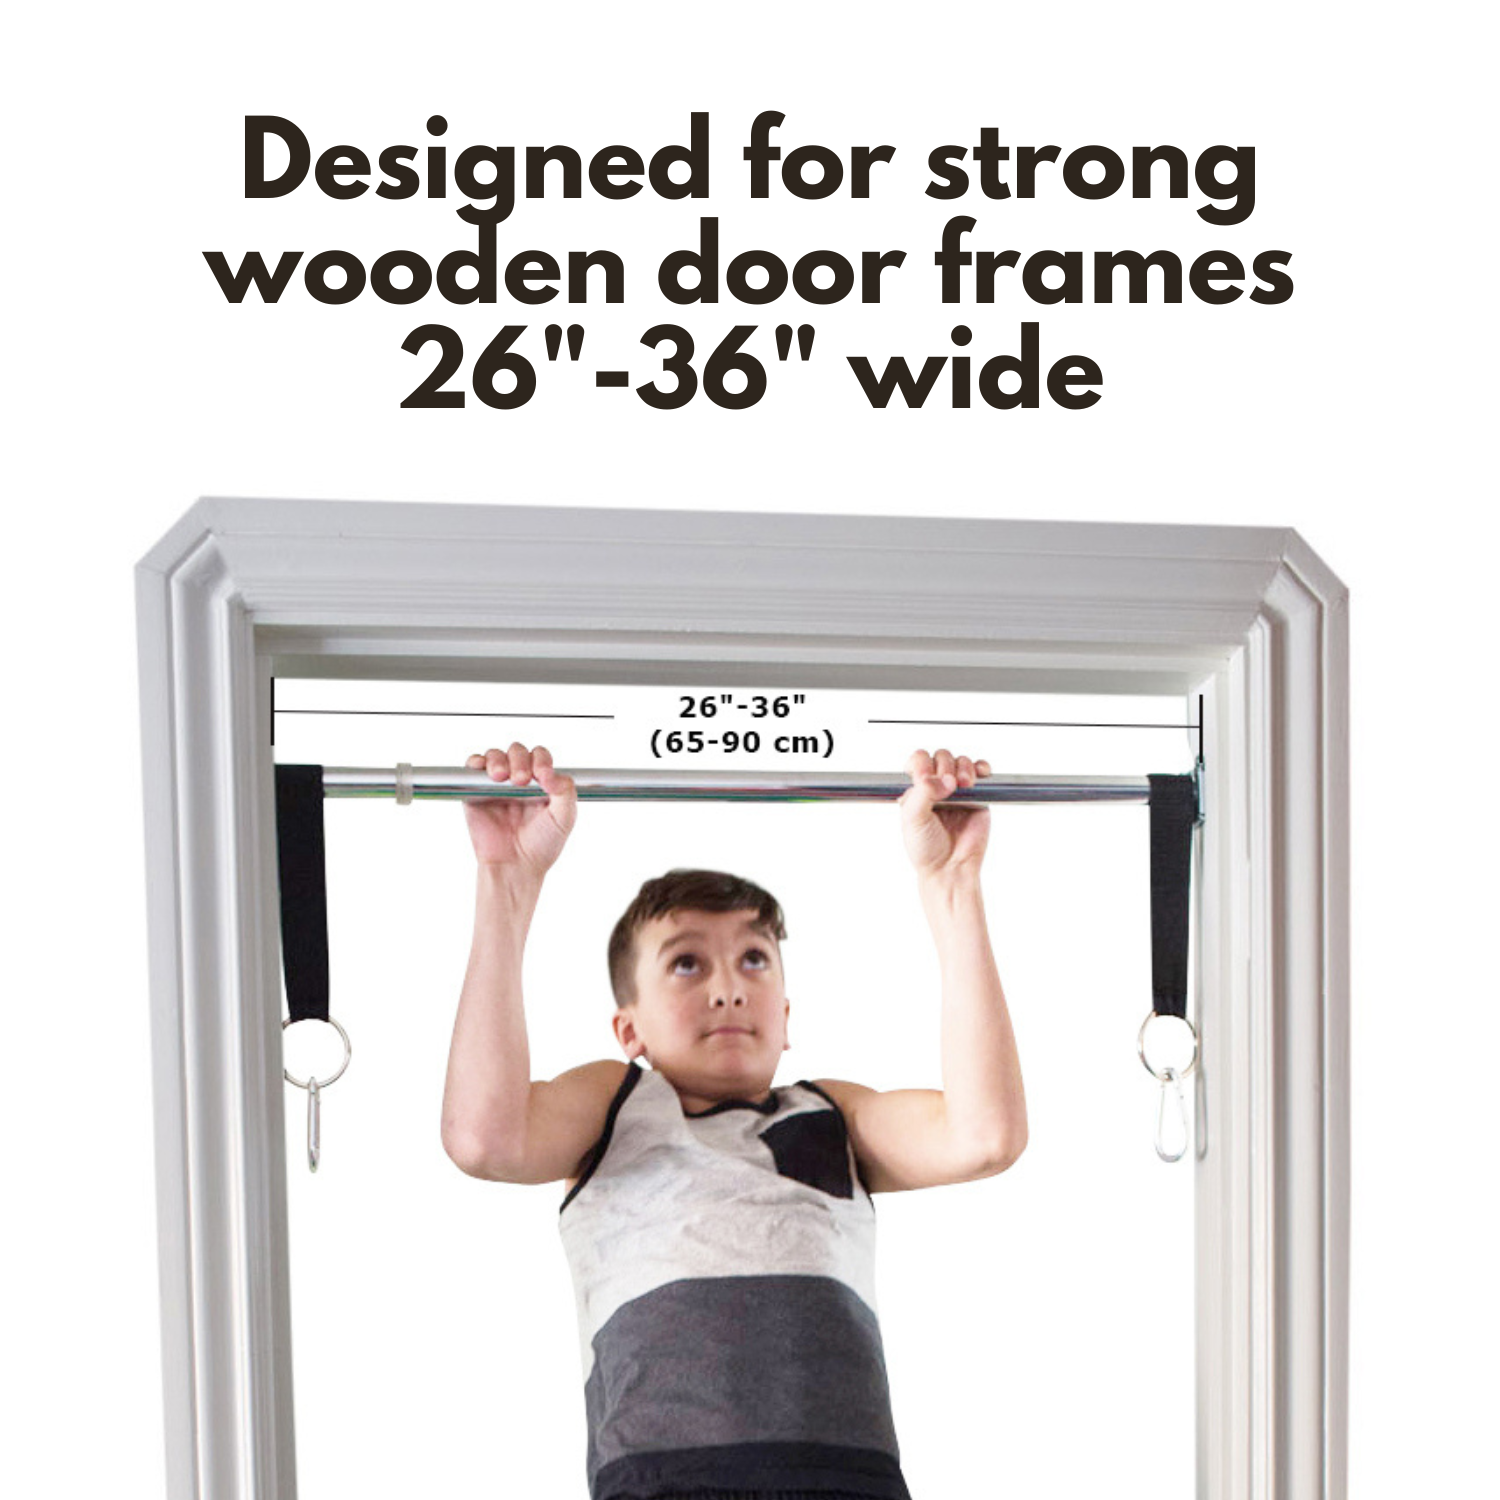 The doorway swing is designed for a strong wooden door frame 26-36 inches wide